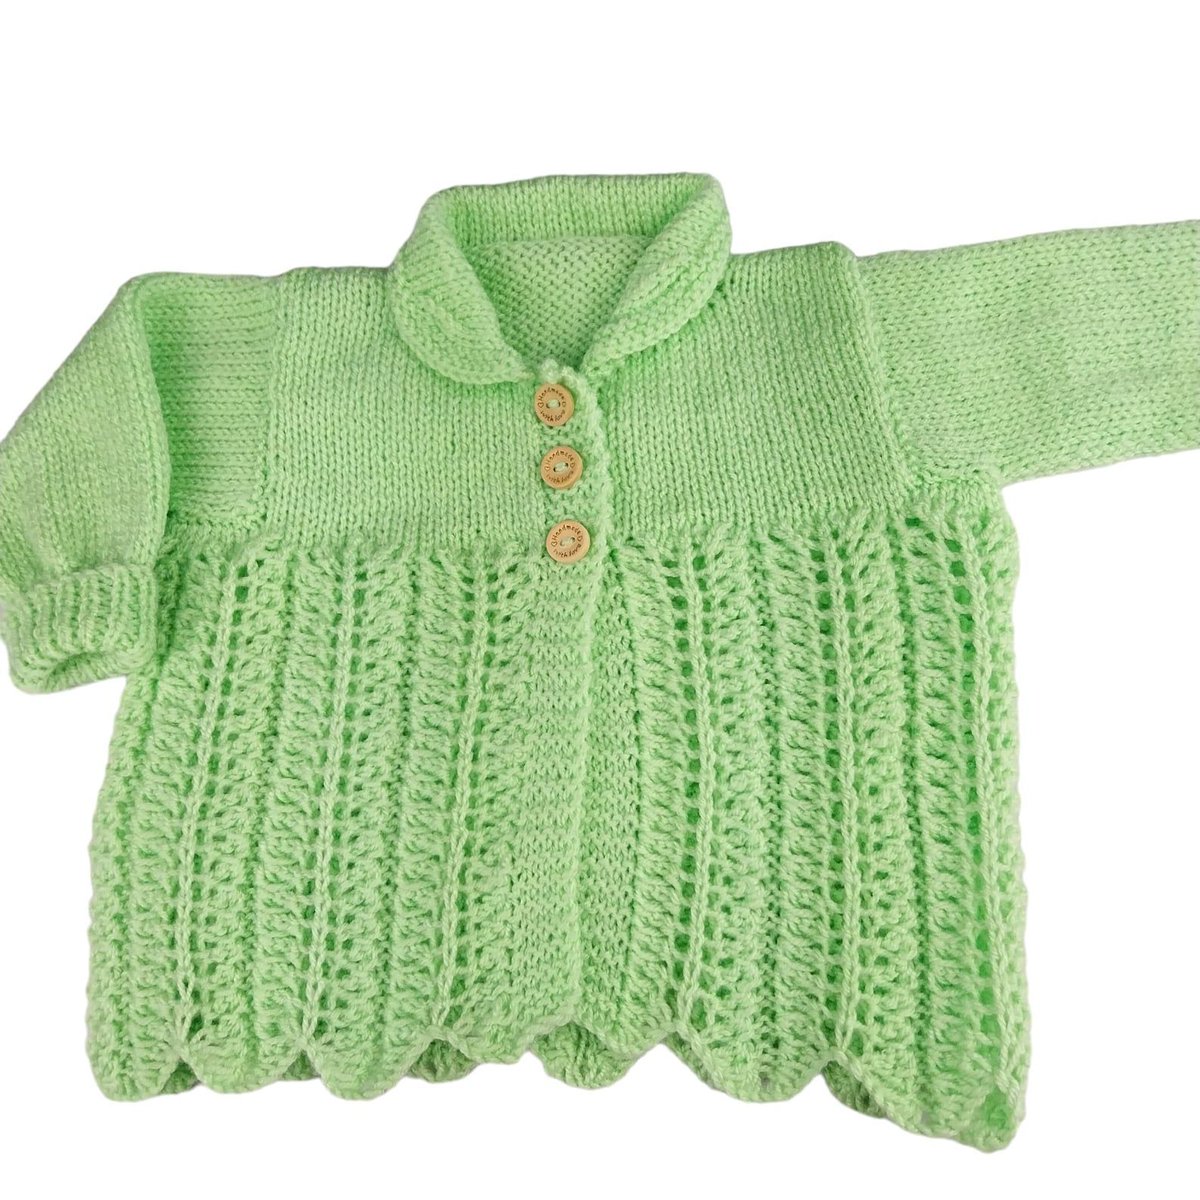 Celebrate the arrival of a newborn with this light green baby cardigan. Perfect for 0-3 months, the unisex design features a charming feather and fan pattern. Ideal for a baby shower gift. knittingtopia.etsy.com/listing/166477… #knittingtopia #etsy #giftsforbaby #craftbizparty #MHHSBD